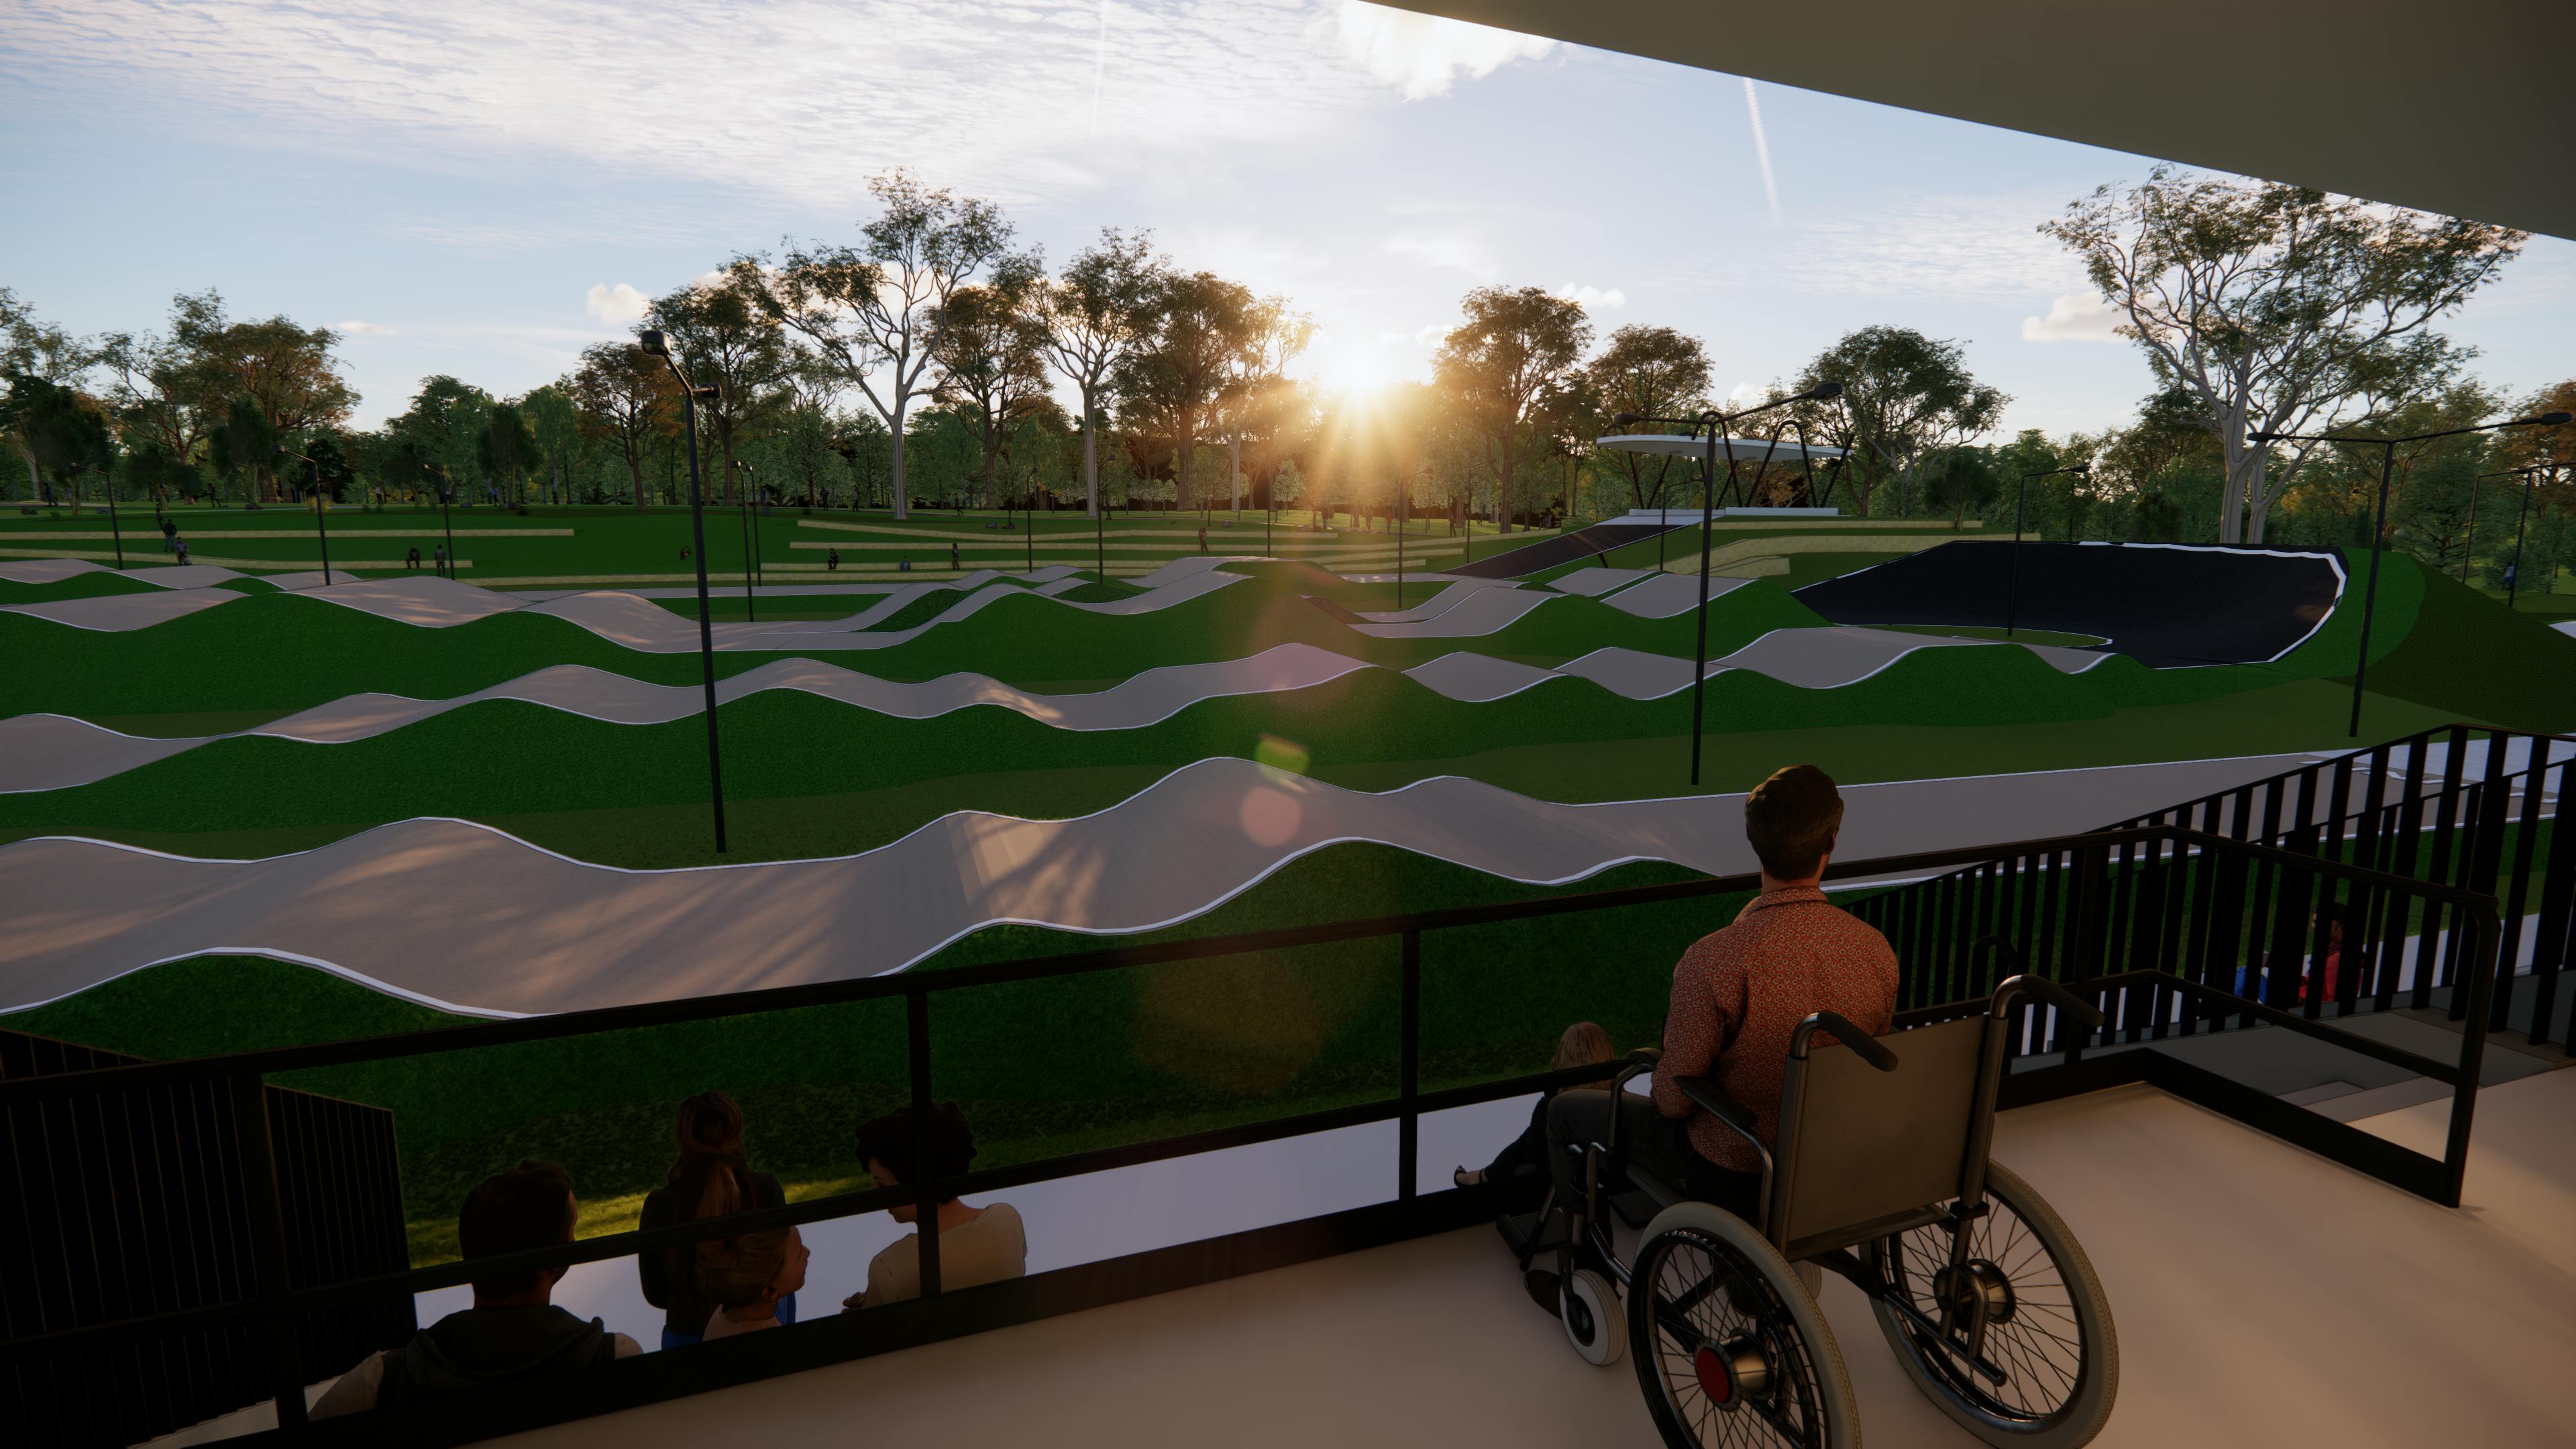 View of the BMX track from the clubhouse at sunset